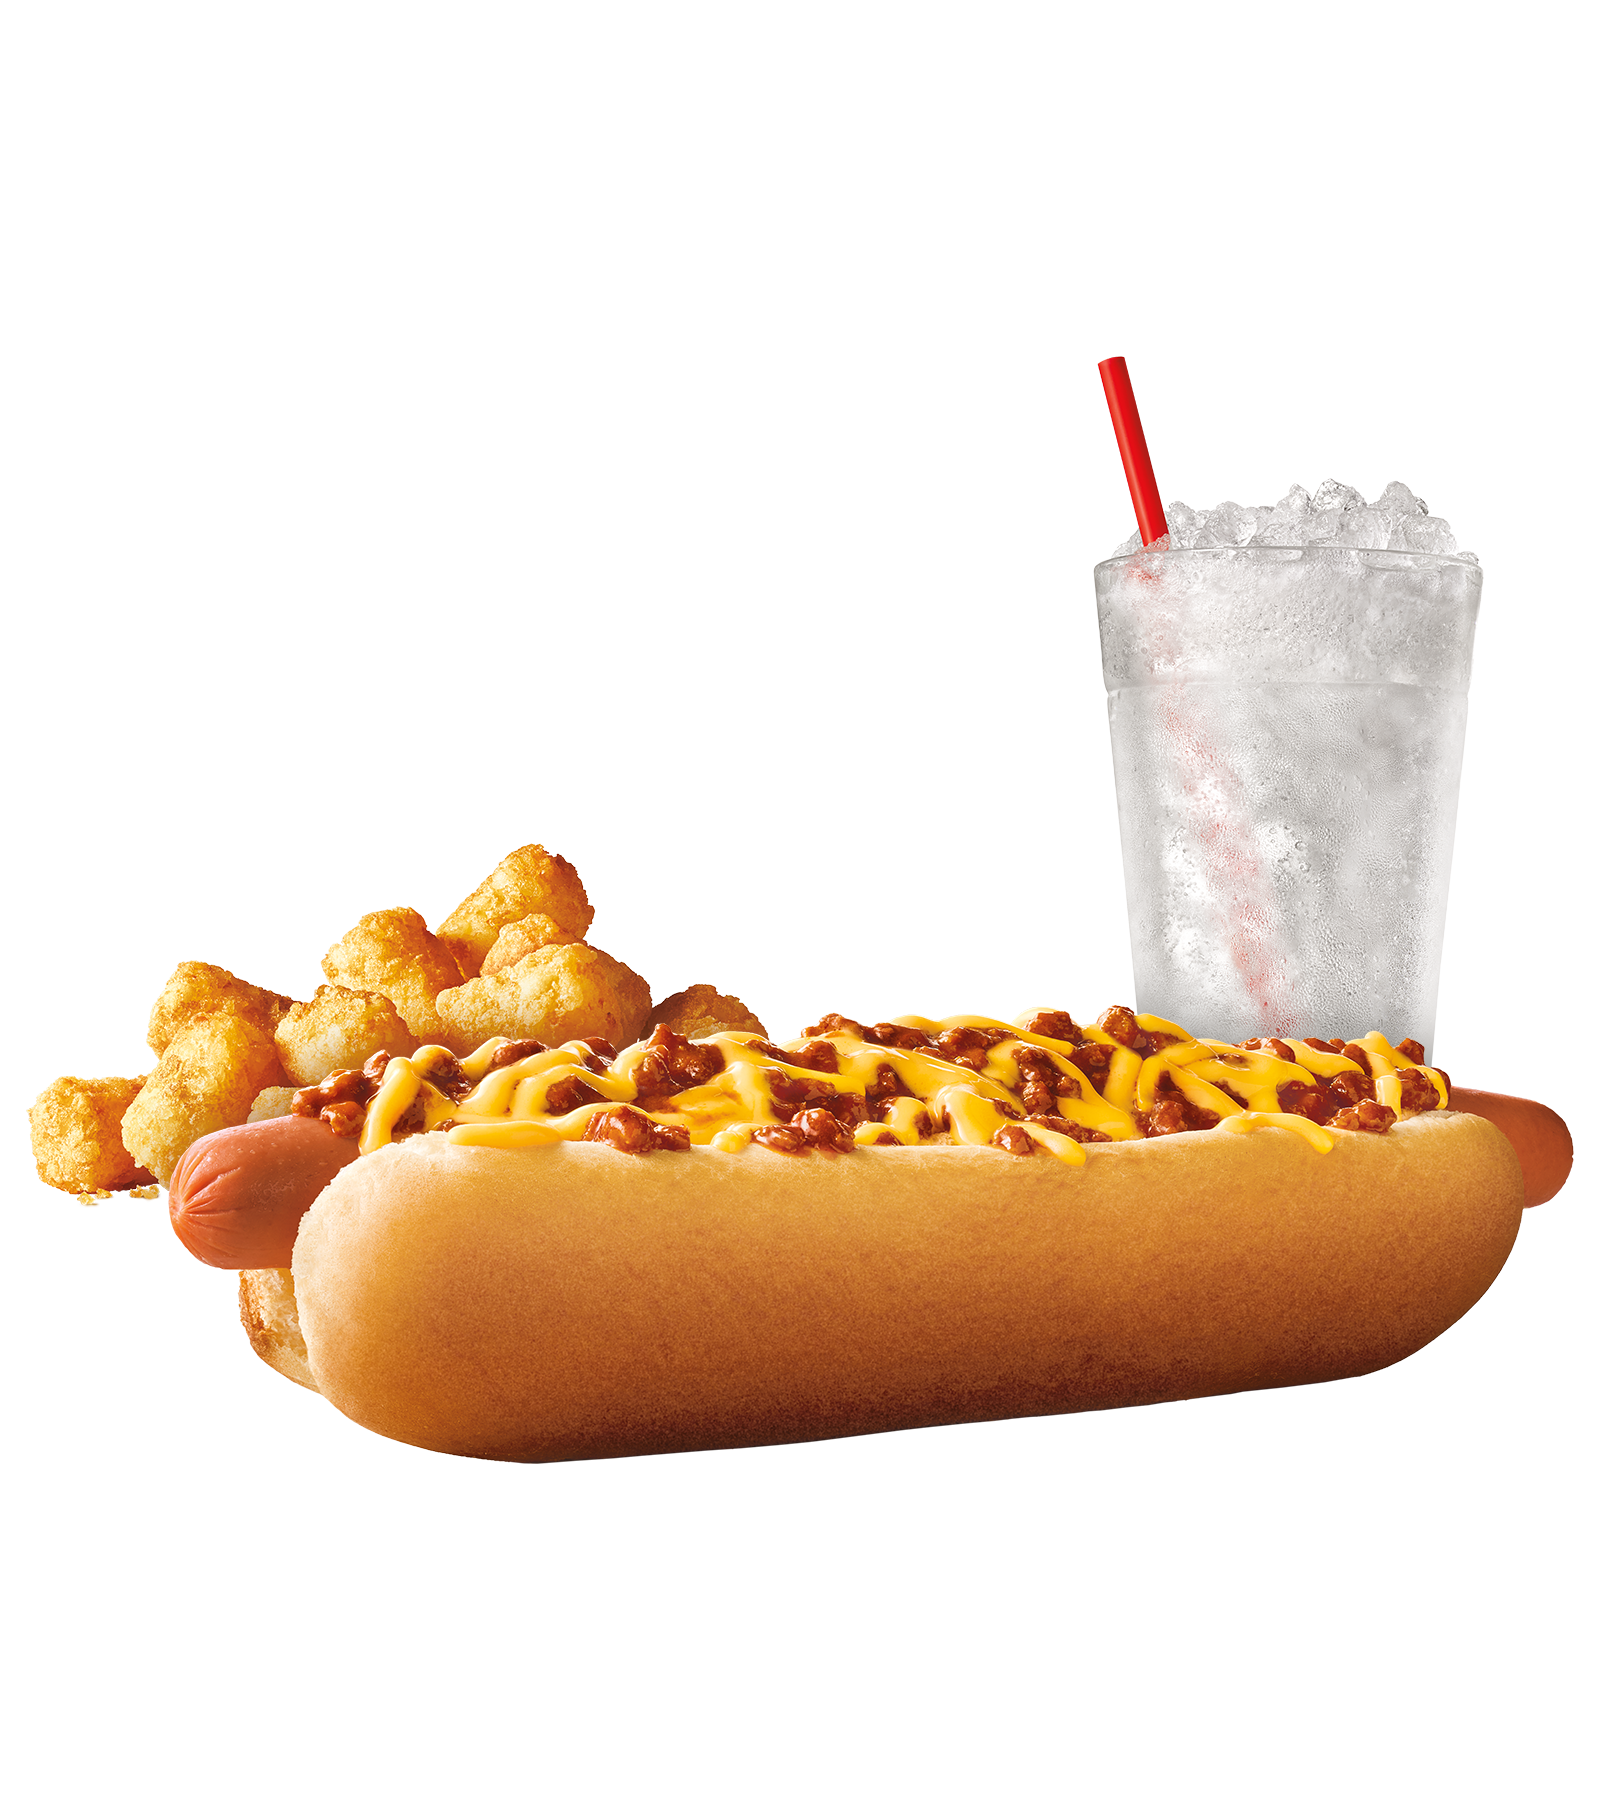 how much is a coney dog at sonic